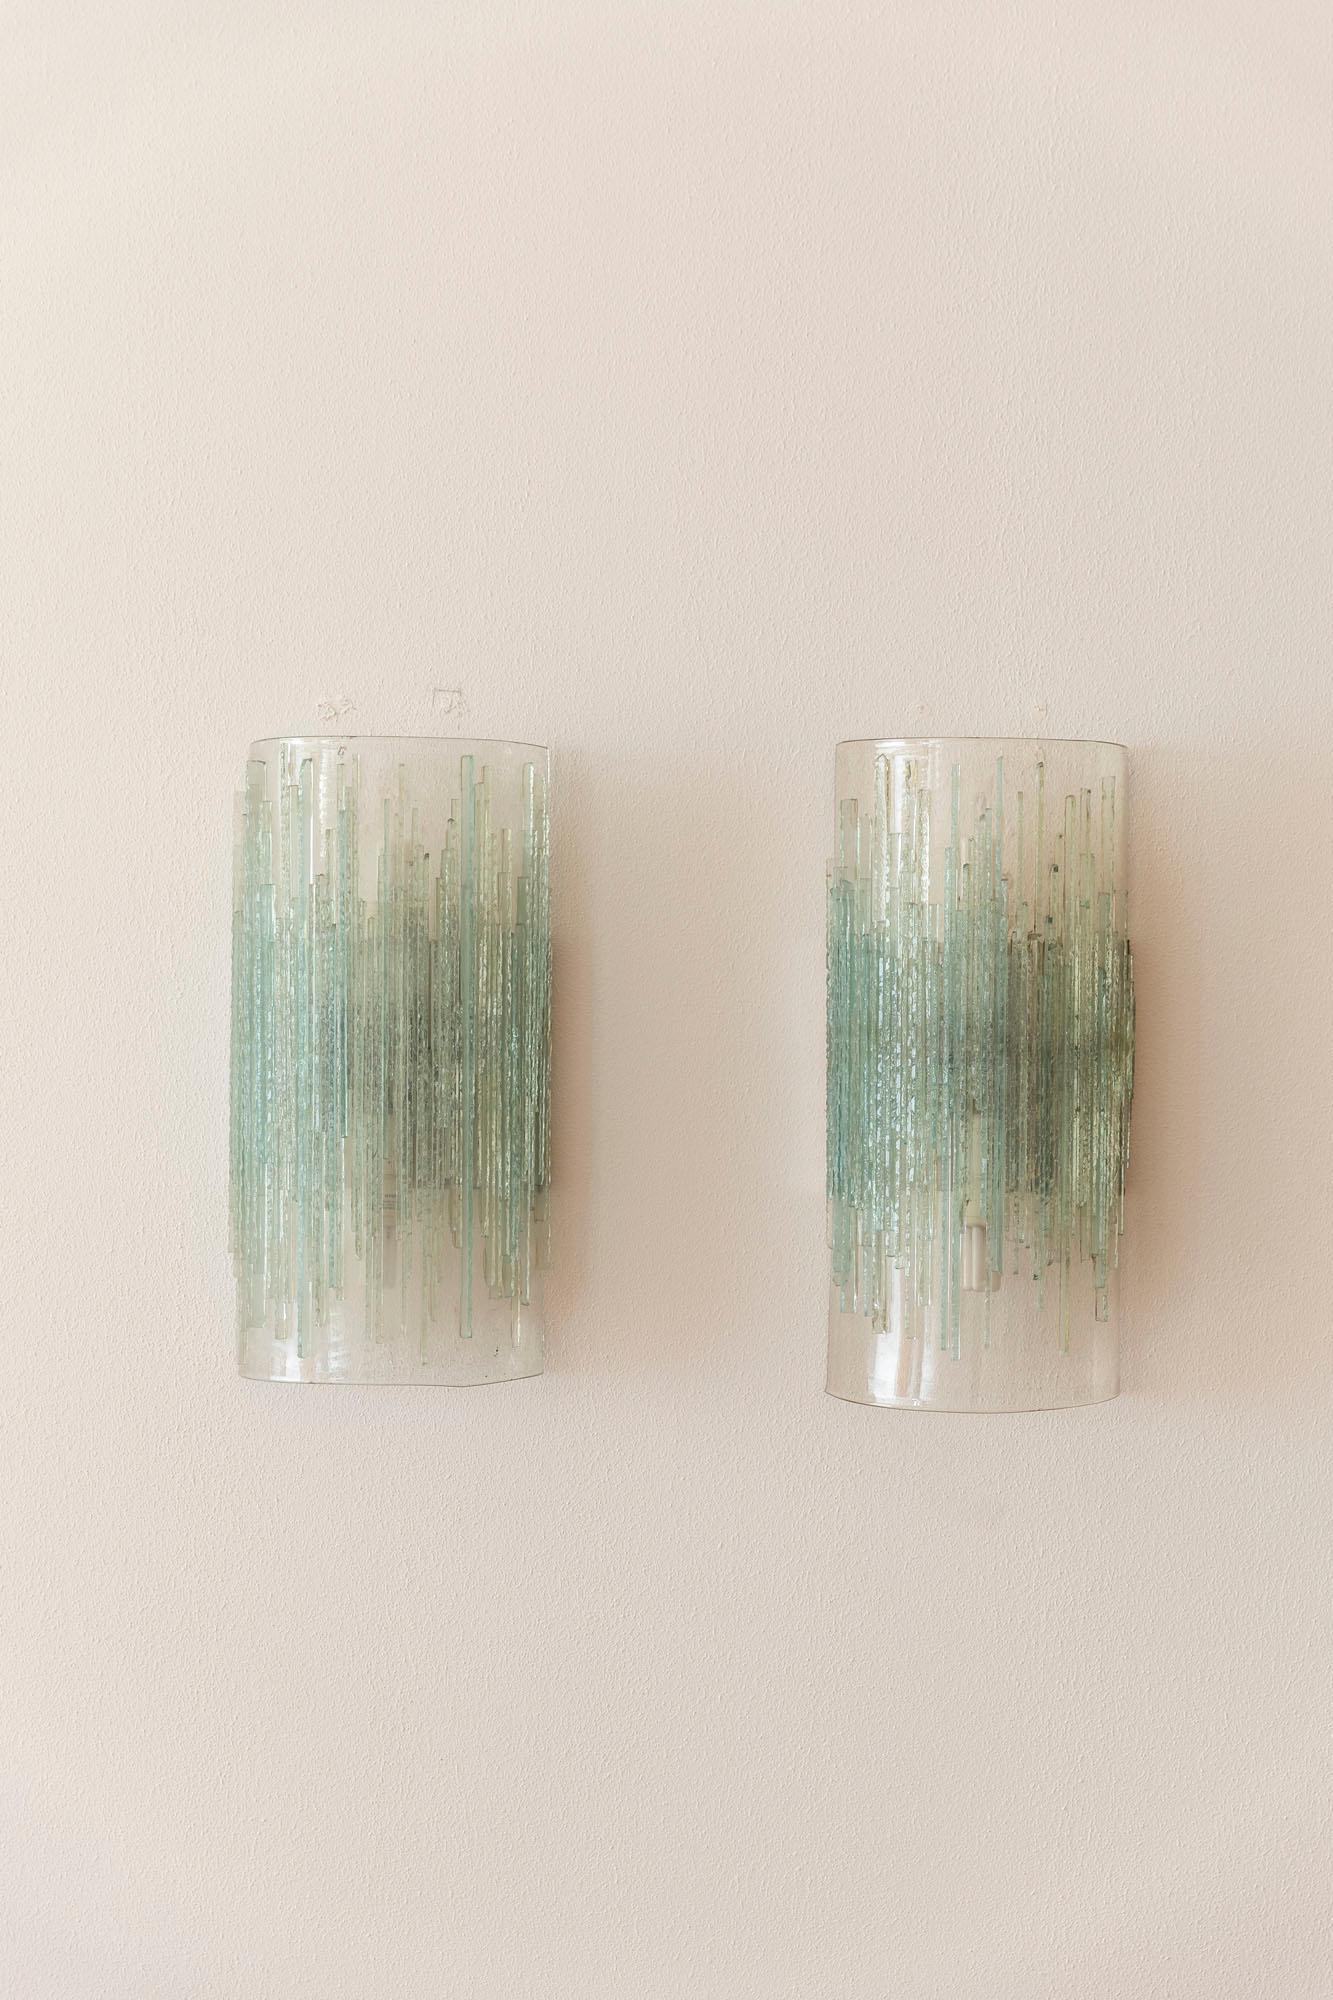 Pair of huge Murano glass wall lights.
Chromed support, hemispherical clear glass with frozen green icicle glass structures.
Italy, 1970 ca.